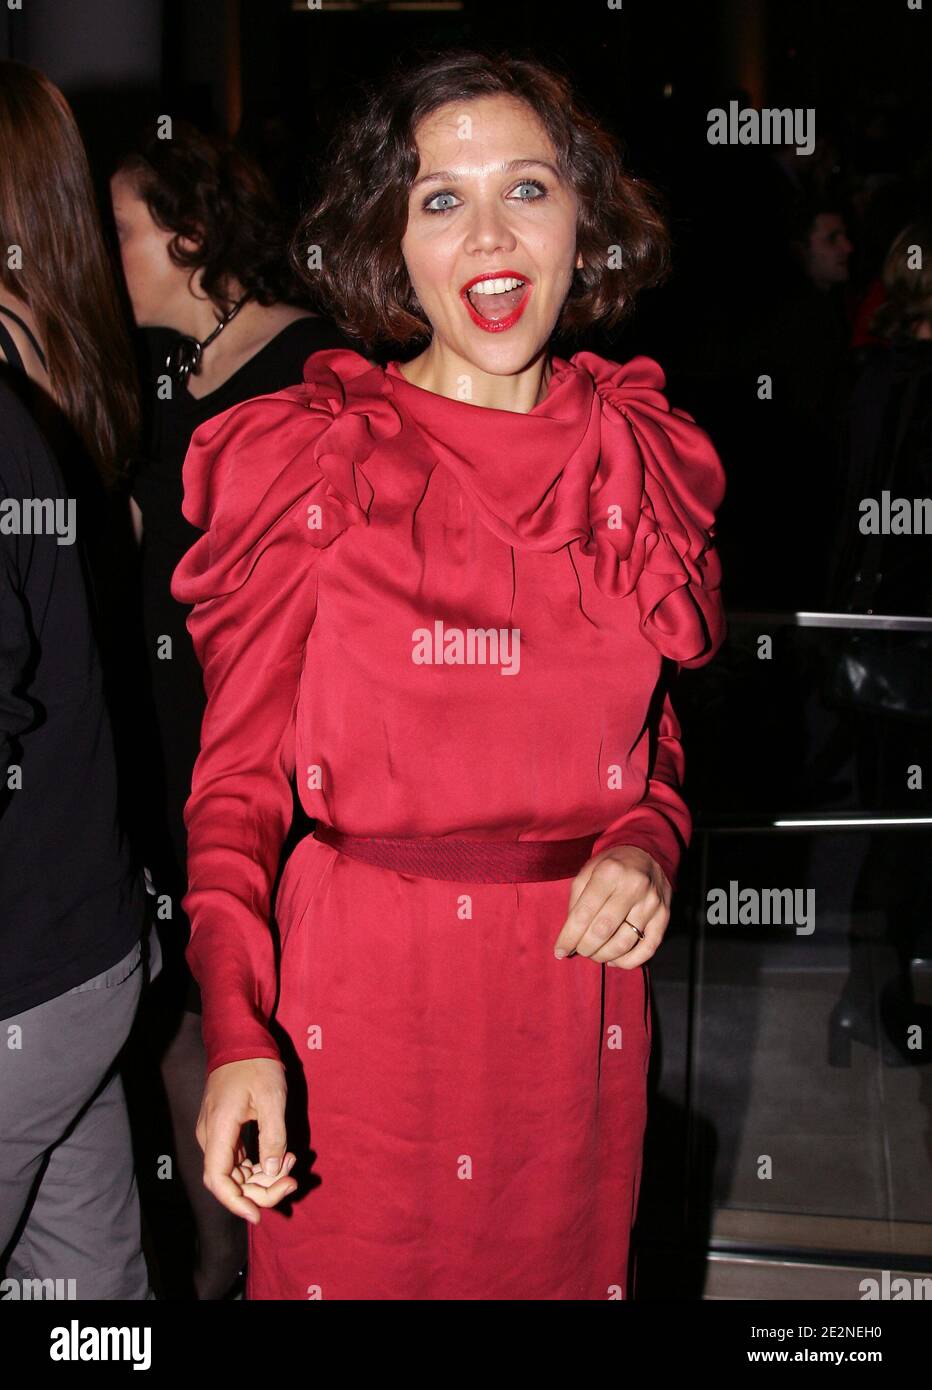 Actress Maggie Gyllenhaal arriving for The USA Network's Character Approved cocktail reception in New York City, NY, USA on February 25, 2010. Photo by Charles Guerin/ABACAPRESS.COM Stock Photo